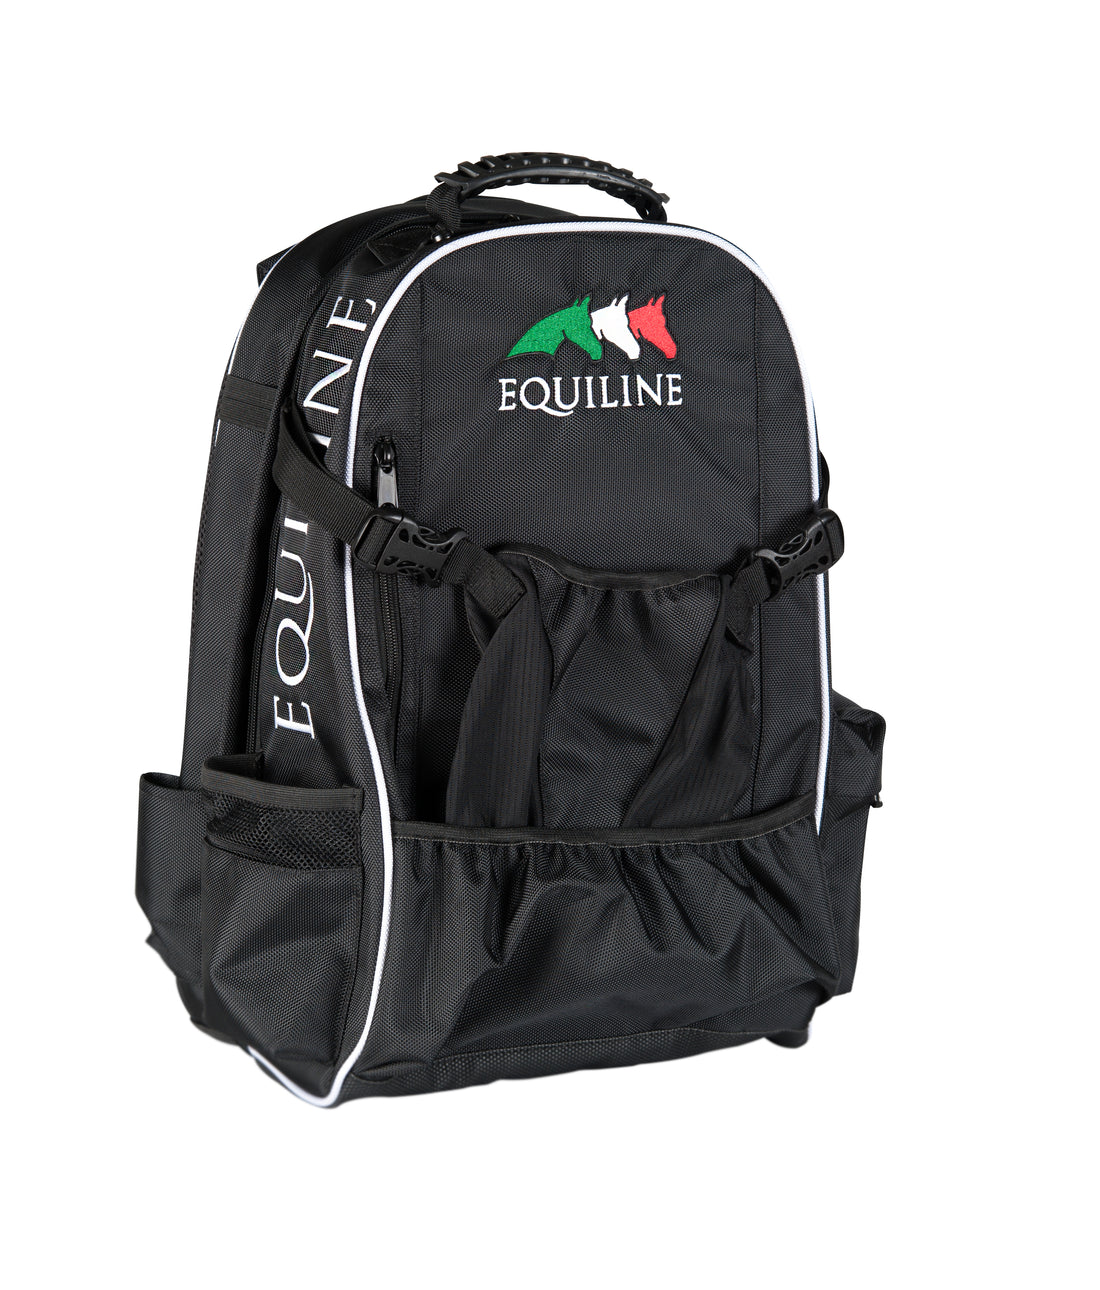 The Equiline Ring Bag is the perfect rucksack. This bag has multiple compartments, making it easy to organise. It is super spacious and lightweight. It’s made with a sturdy, tear resistant material so it’s incredibly durable and has padded shoulder straps making it comfortable to wear.